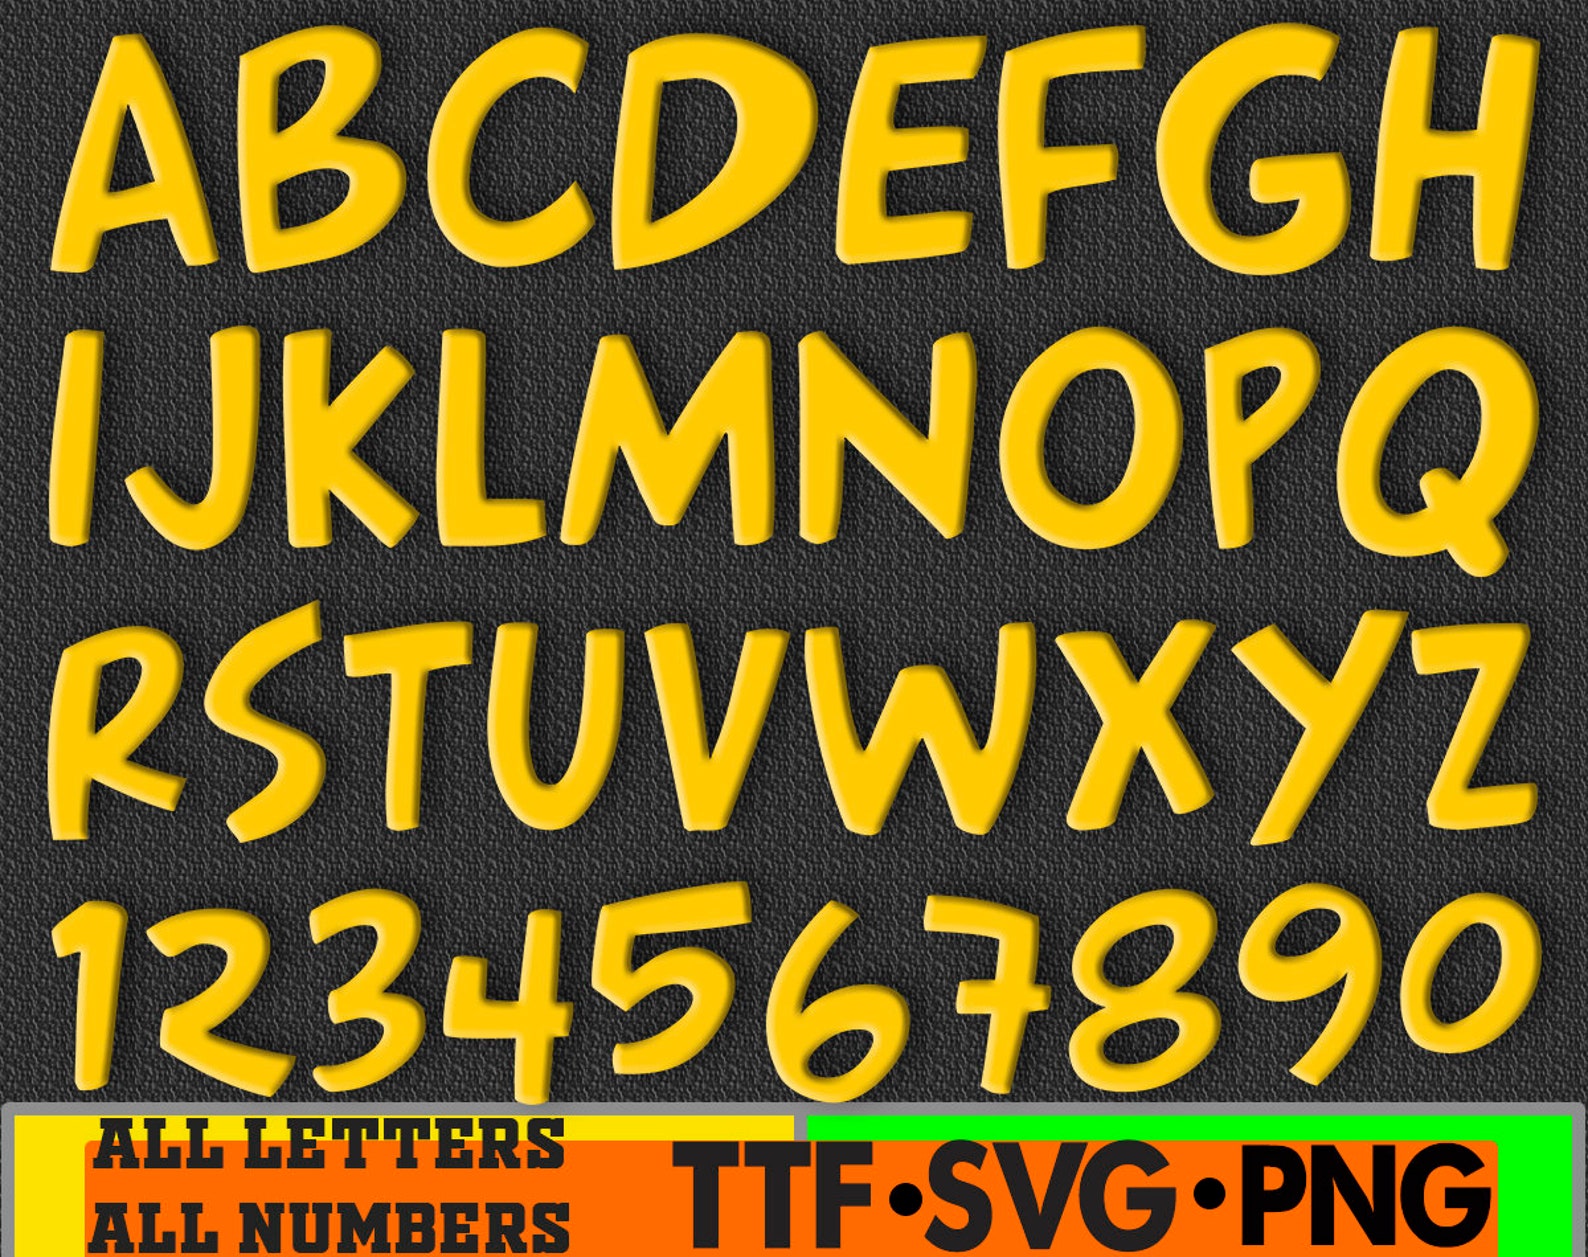 Font cartoon Letters and Numbers SVG PNG Clipart Bundle Svg | Etsy